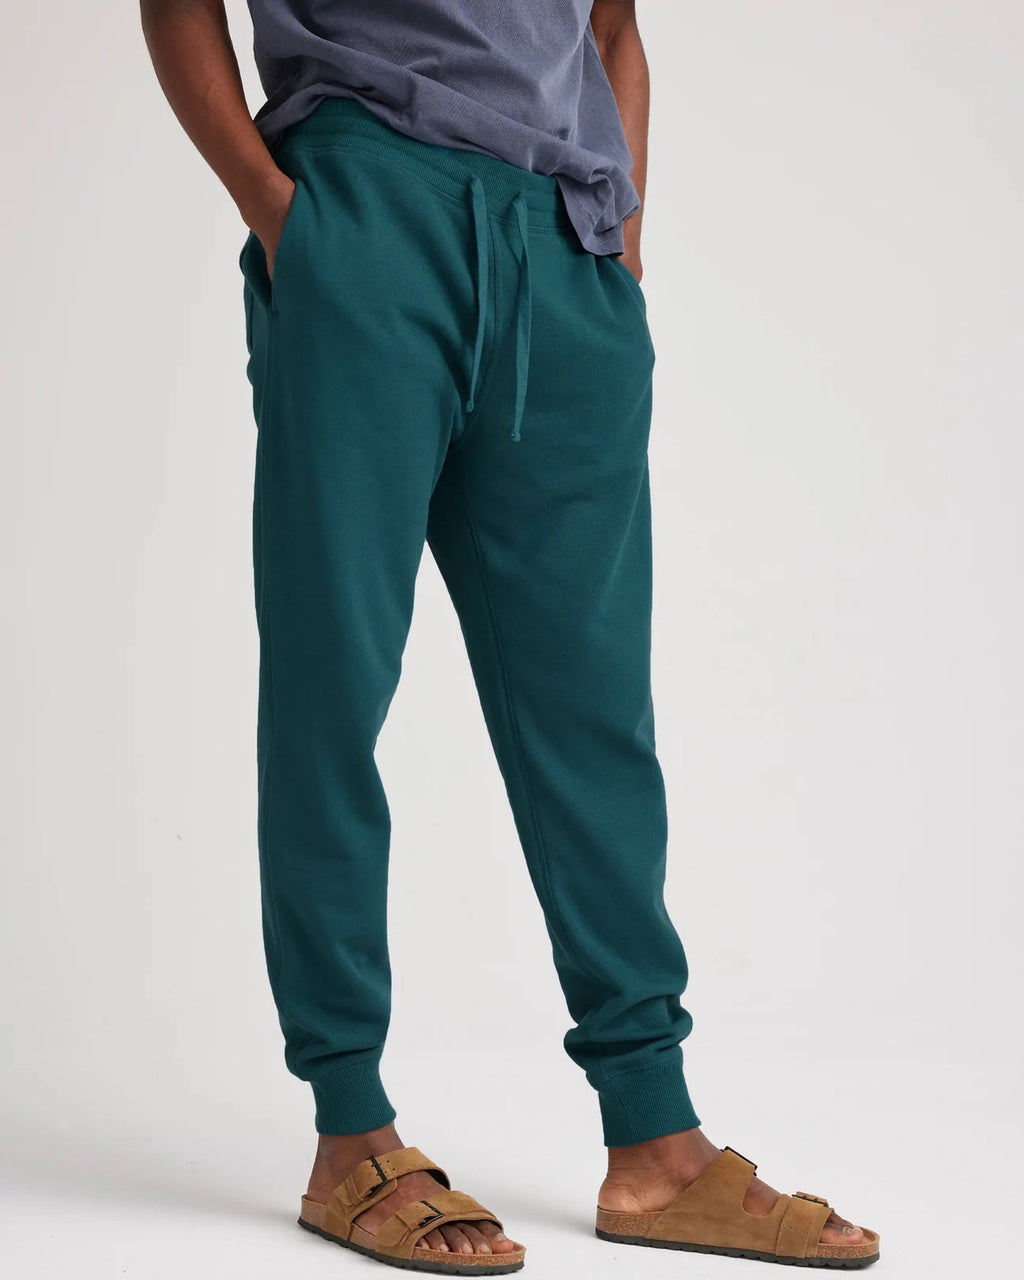 Men's Recycled Fleece Tapered Sweatpant Reflecting Pond